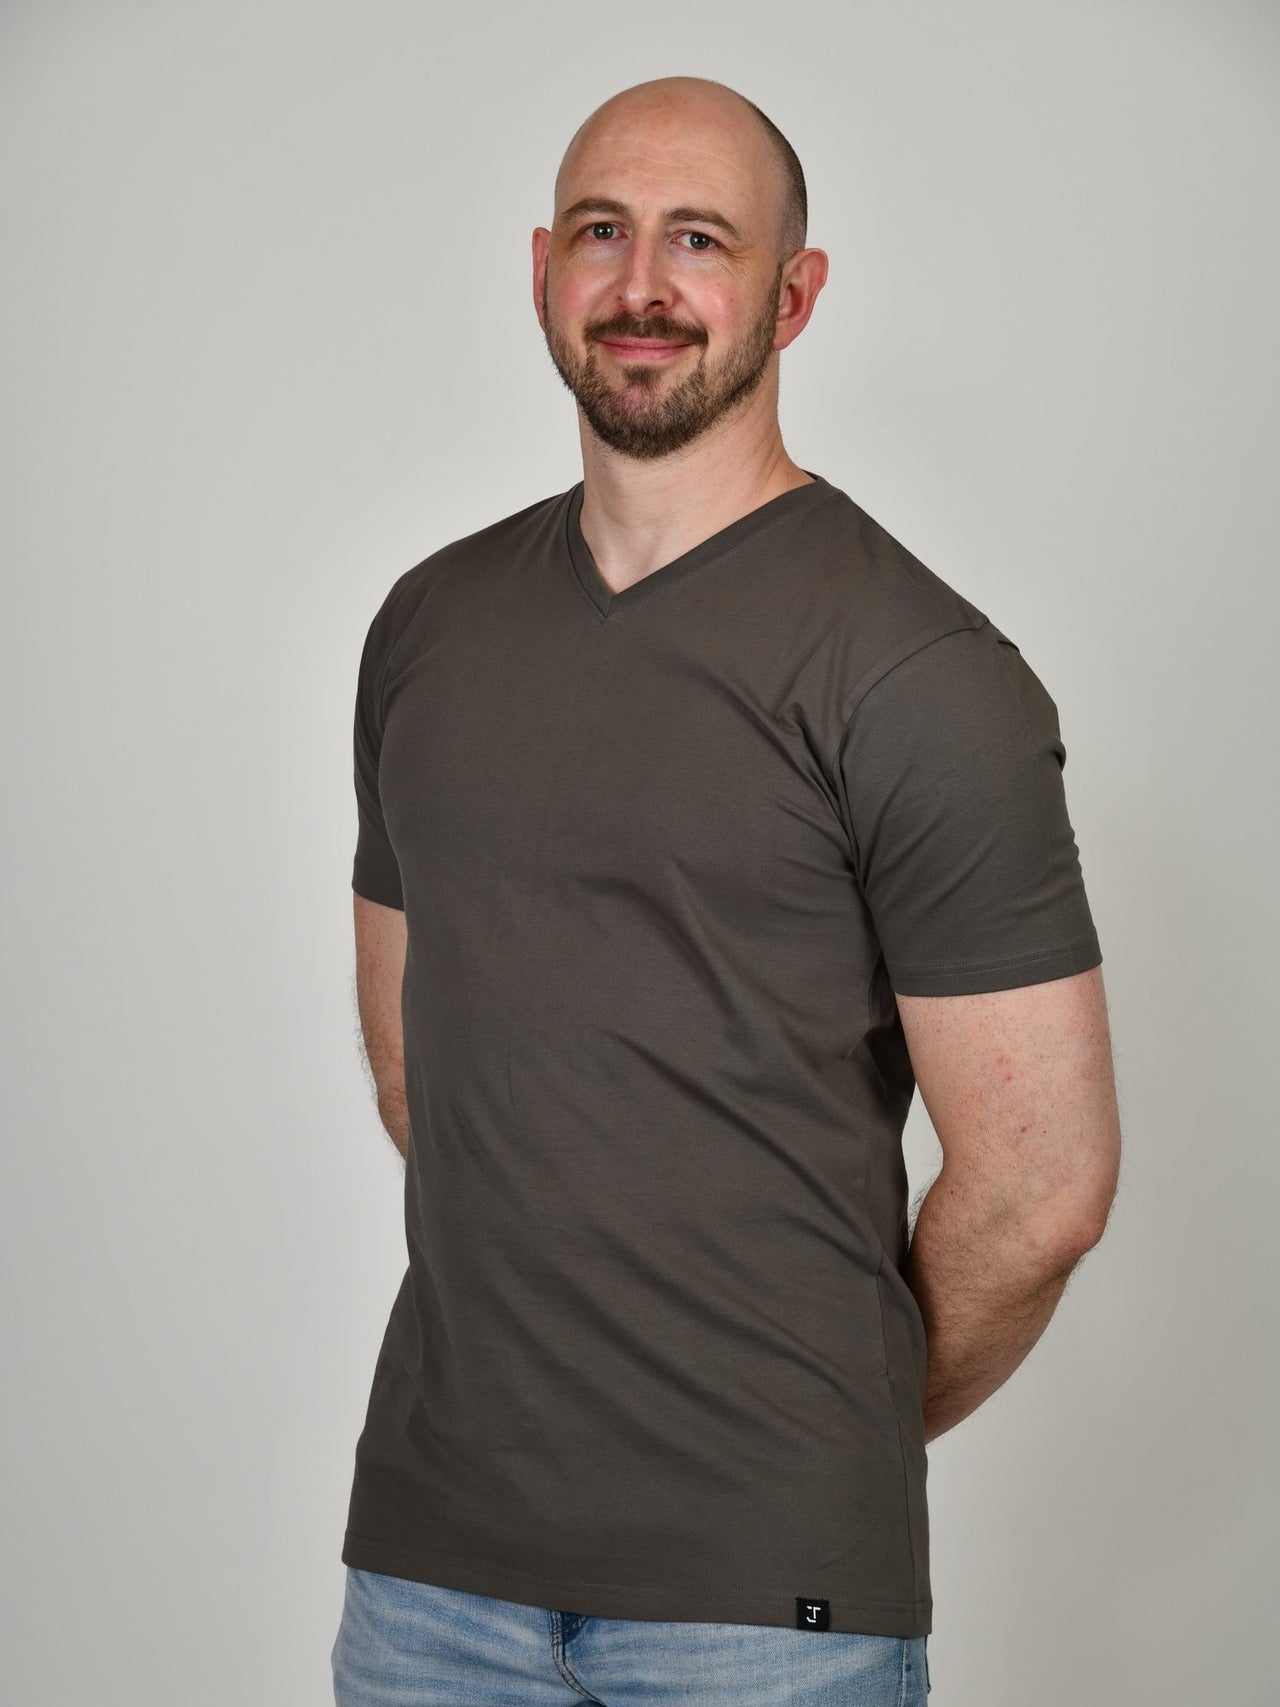 A tall and slim guy in the studio, hands behind back and wearing a dark grey XL tall slim v-neck t-shirt.